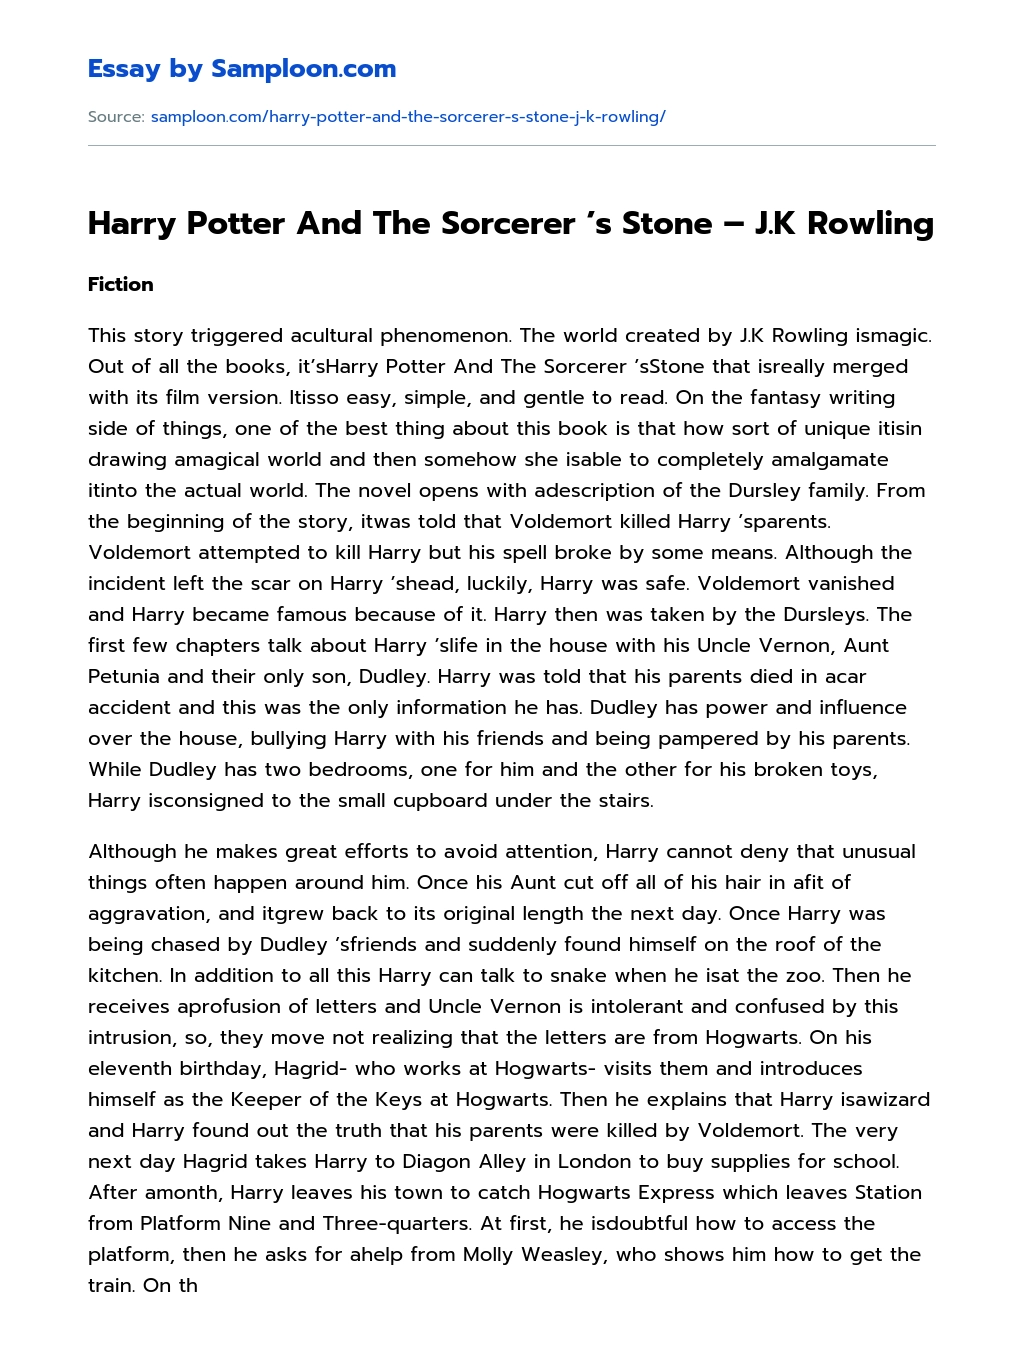 Harry Potter And The Sorcerer ’s Stone – J.K Rowling essay